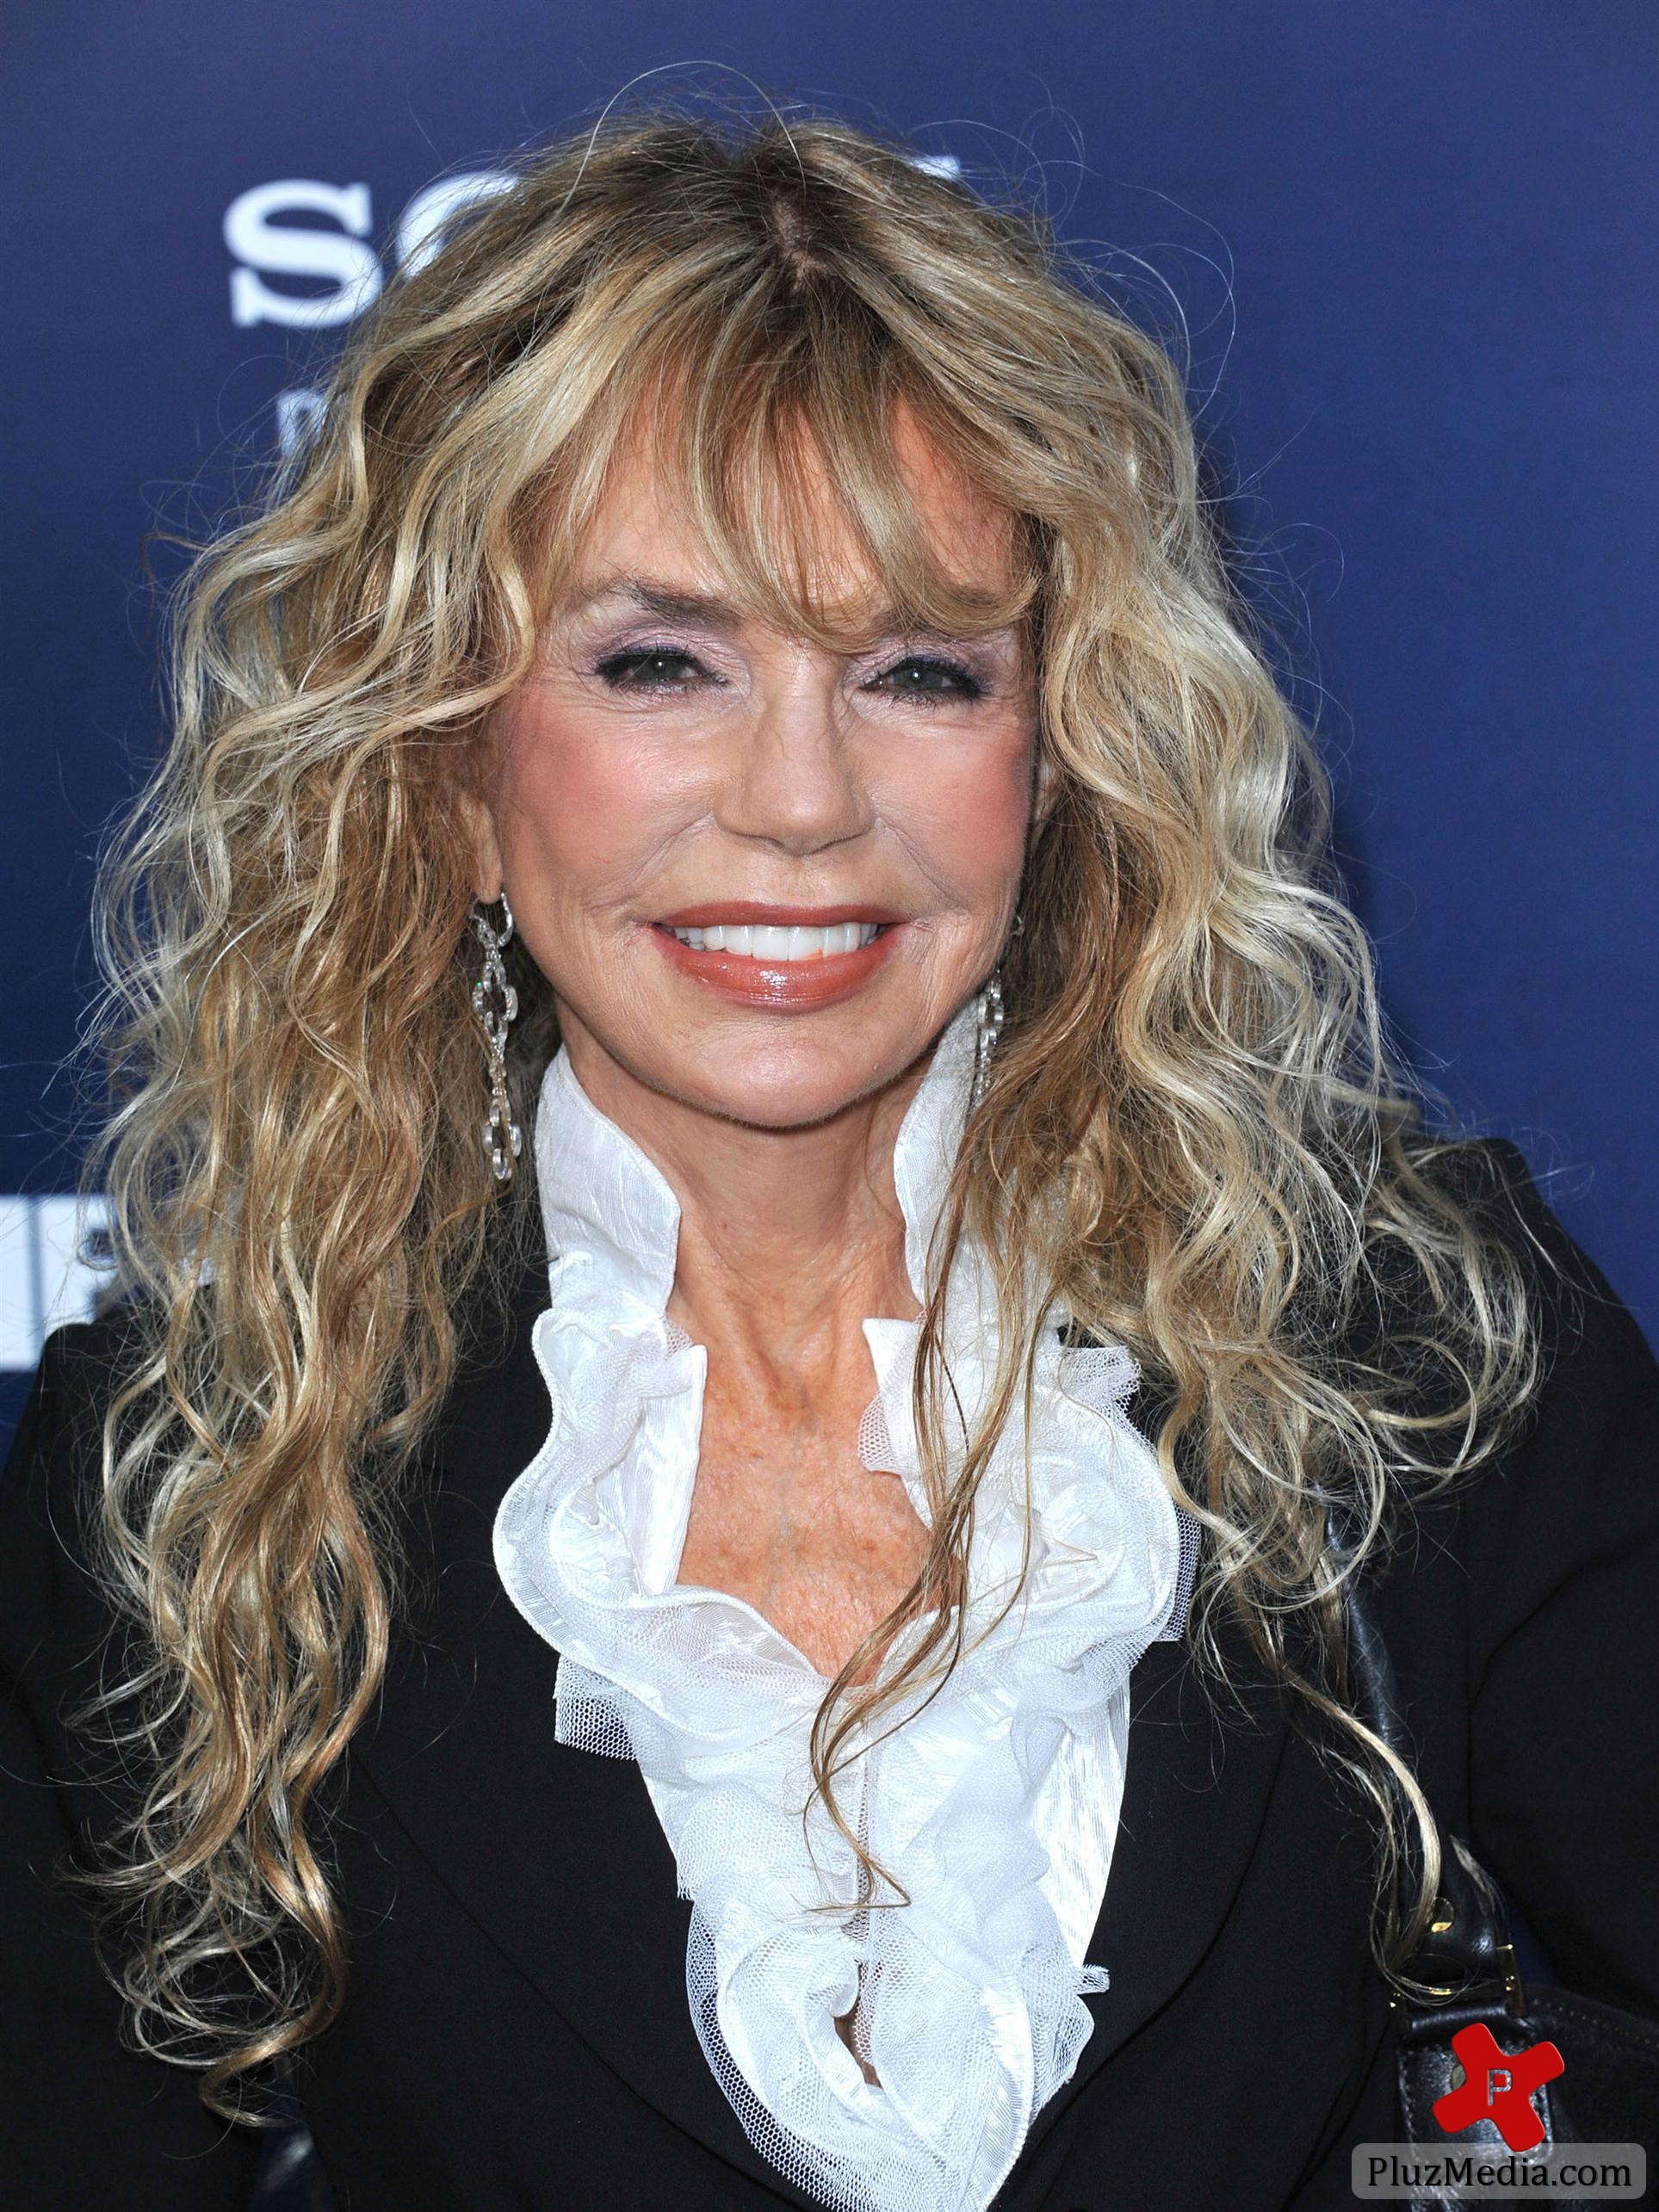 Dyan Cannon - Premiere of 'The Ides Of March' held at the Academy theatre - Arrivals | Picture 88618